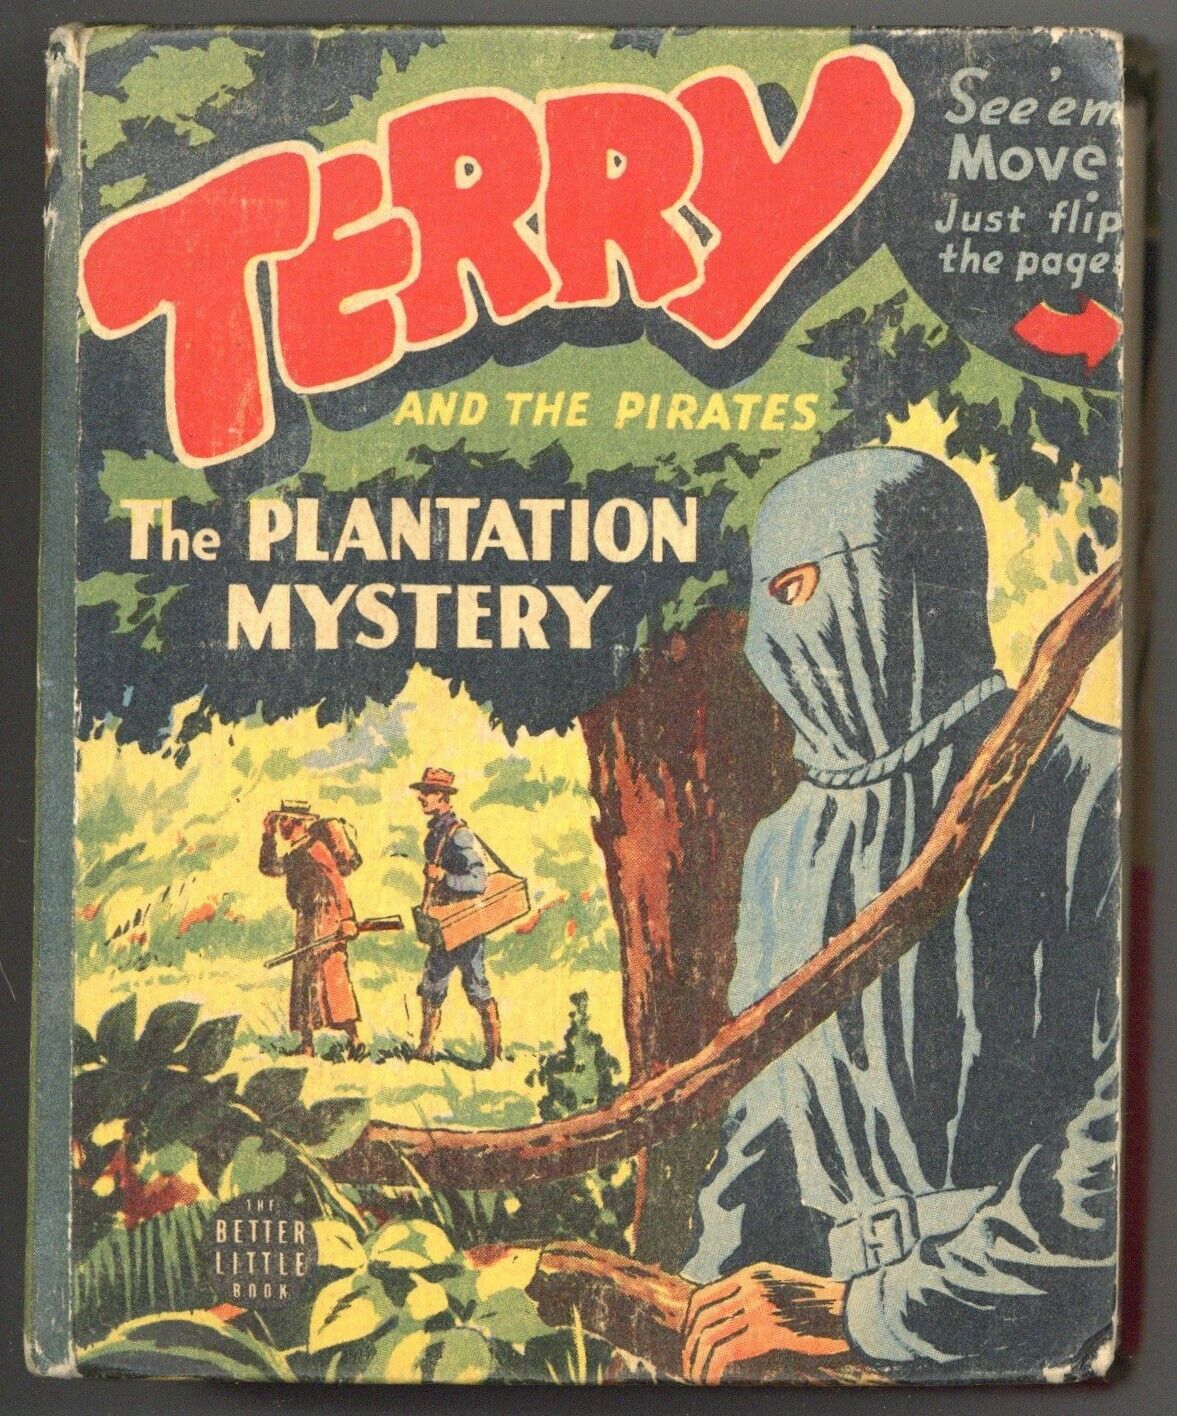 Terry and the Pirates The Plantation Mystery #1436 VG/FN 5.0 1942